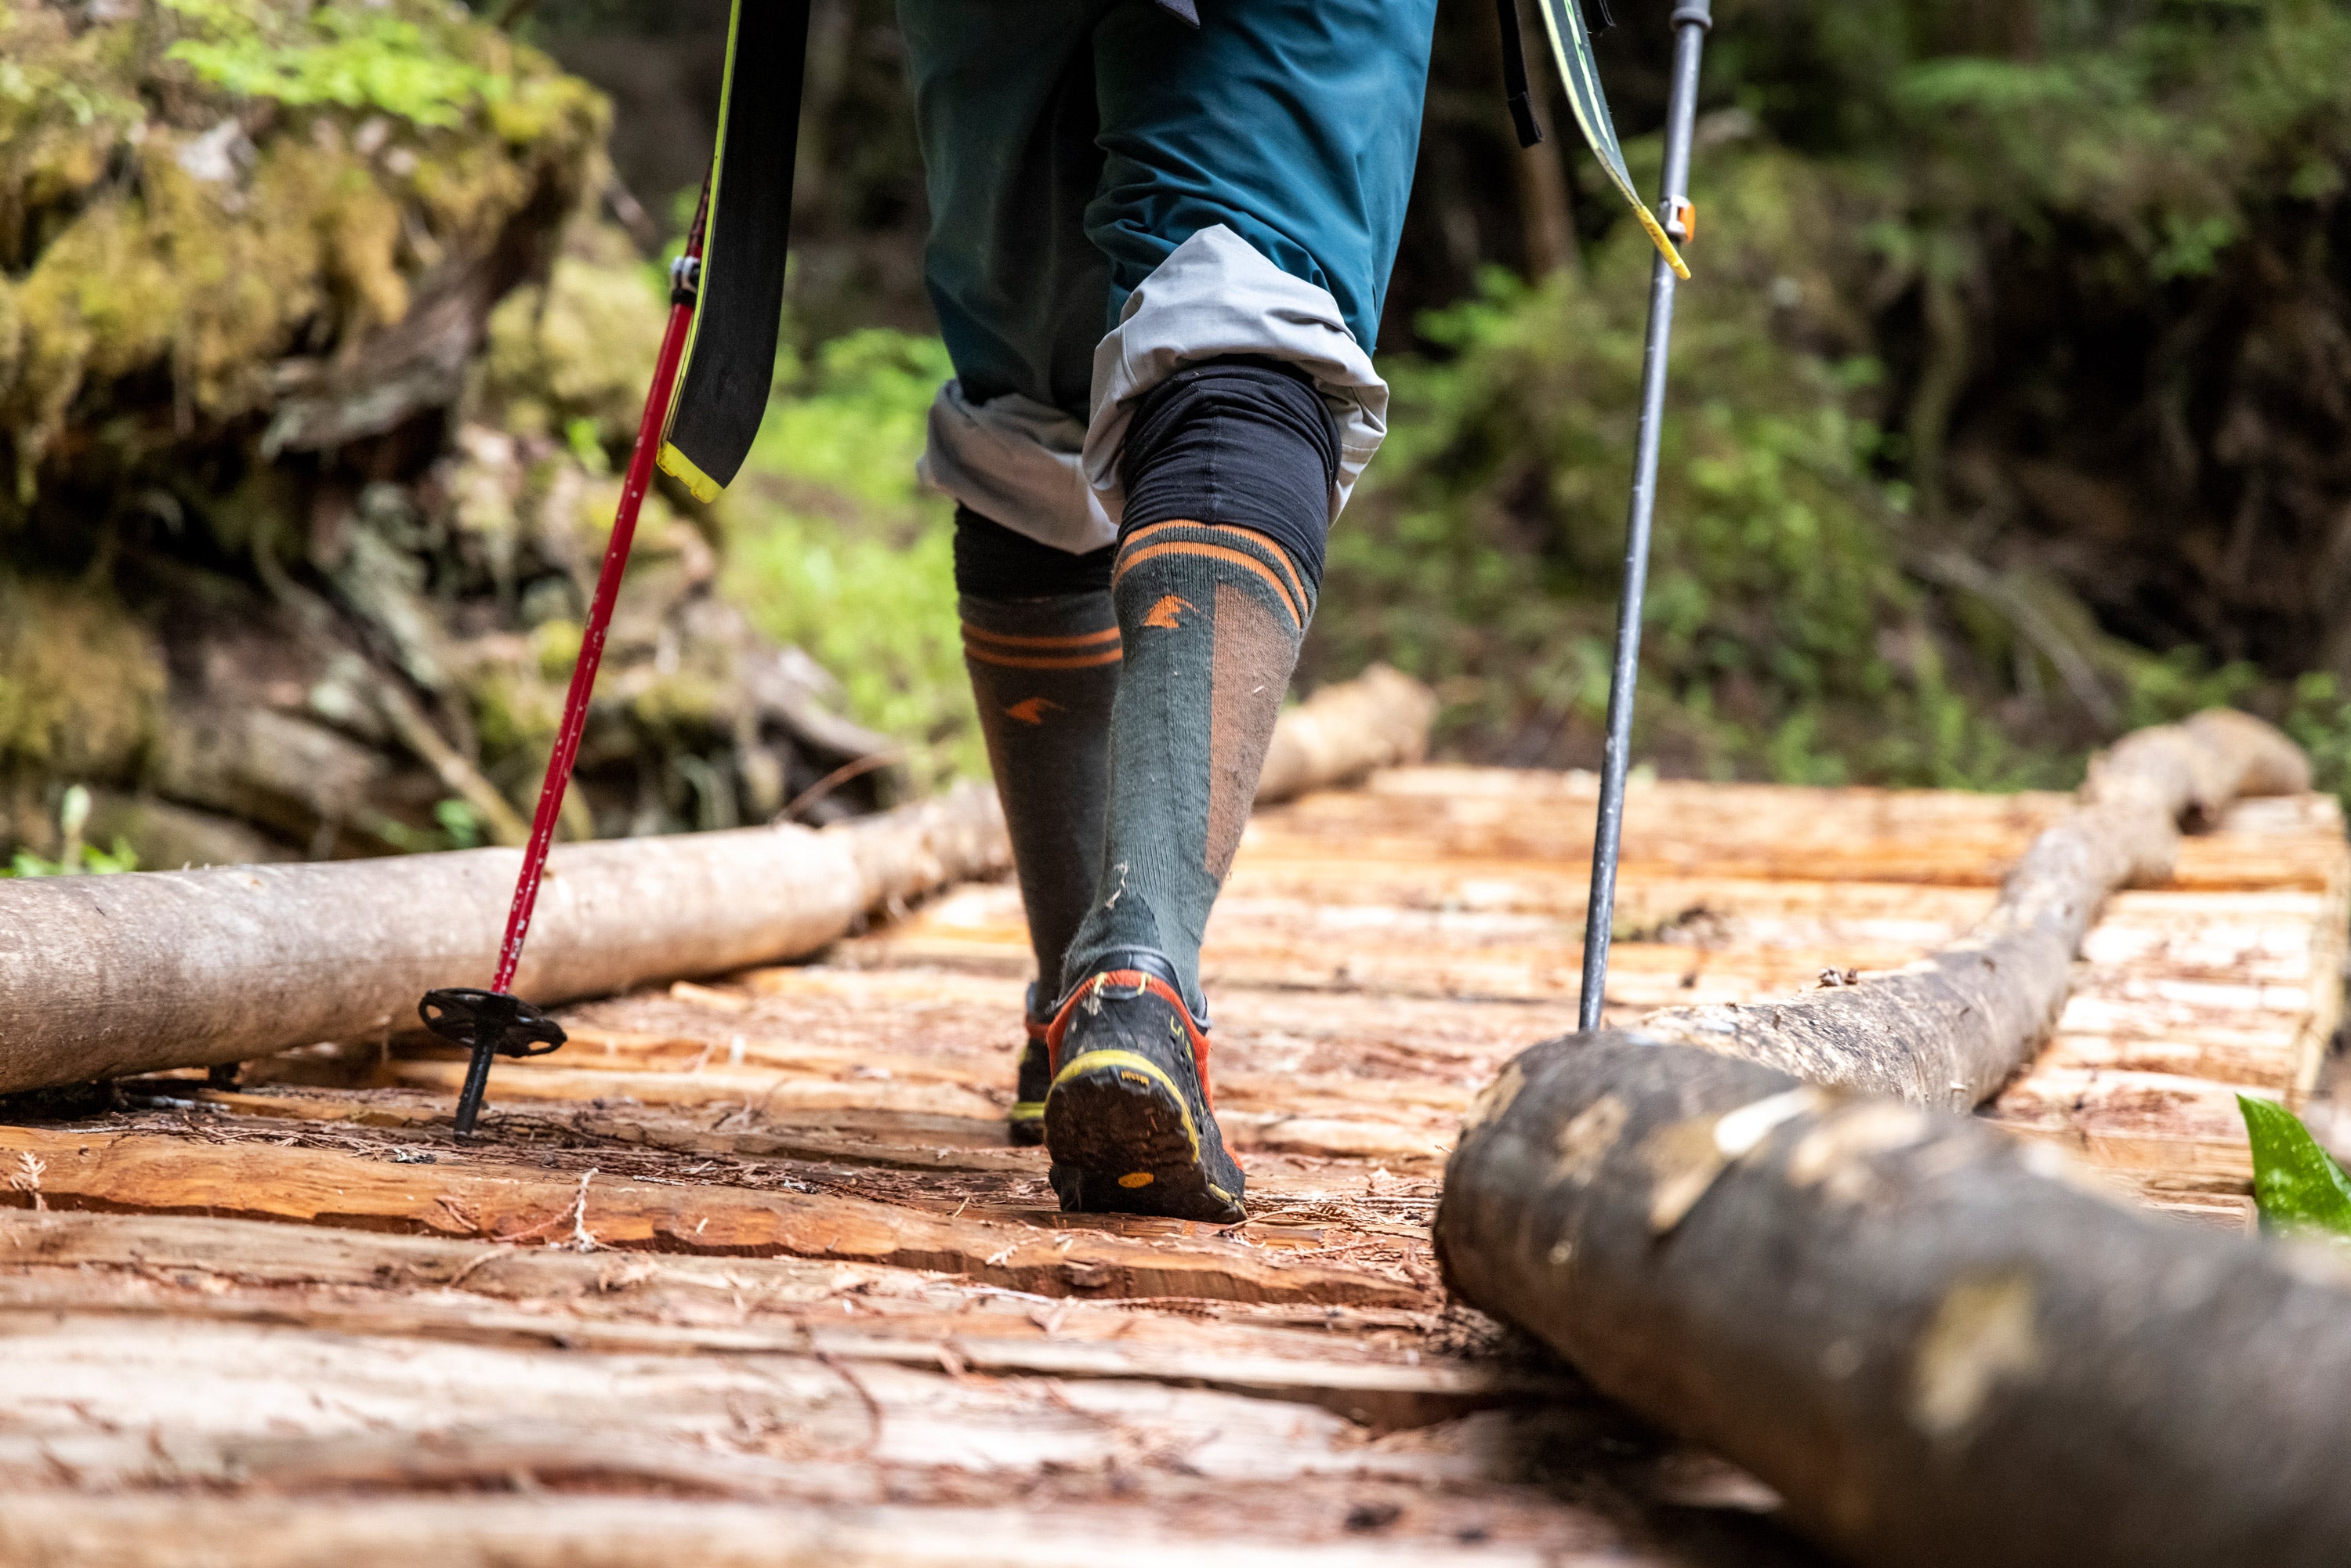 A person walks across a wooden bridge in tennis shoes and Ridge Merino socks heading out on a ski tour